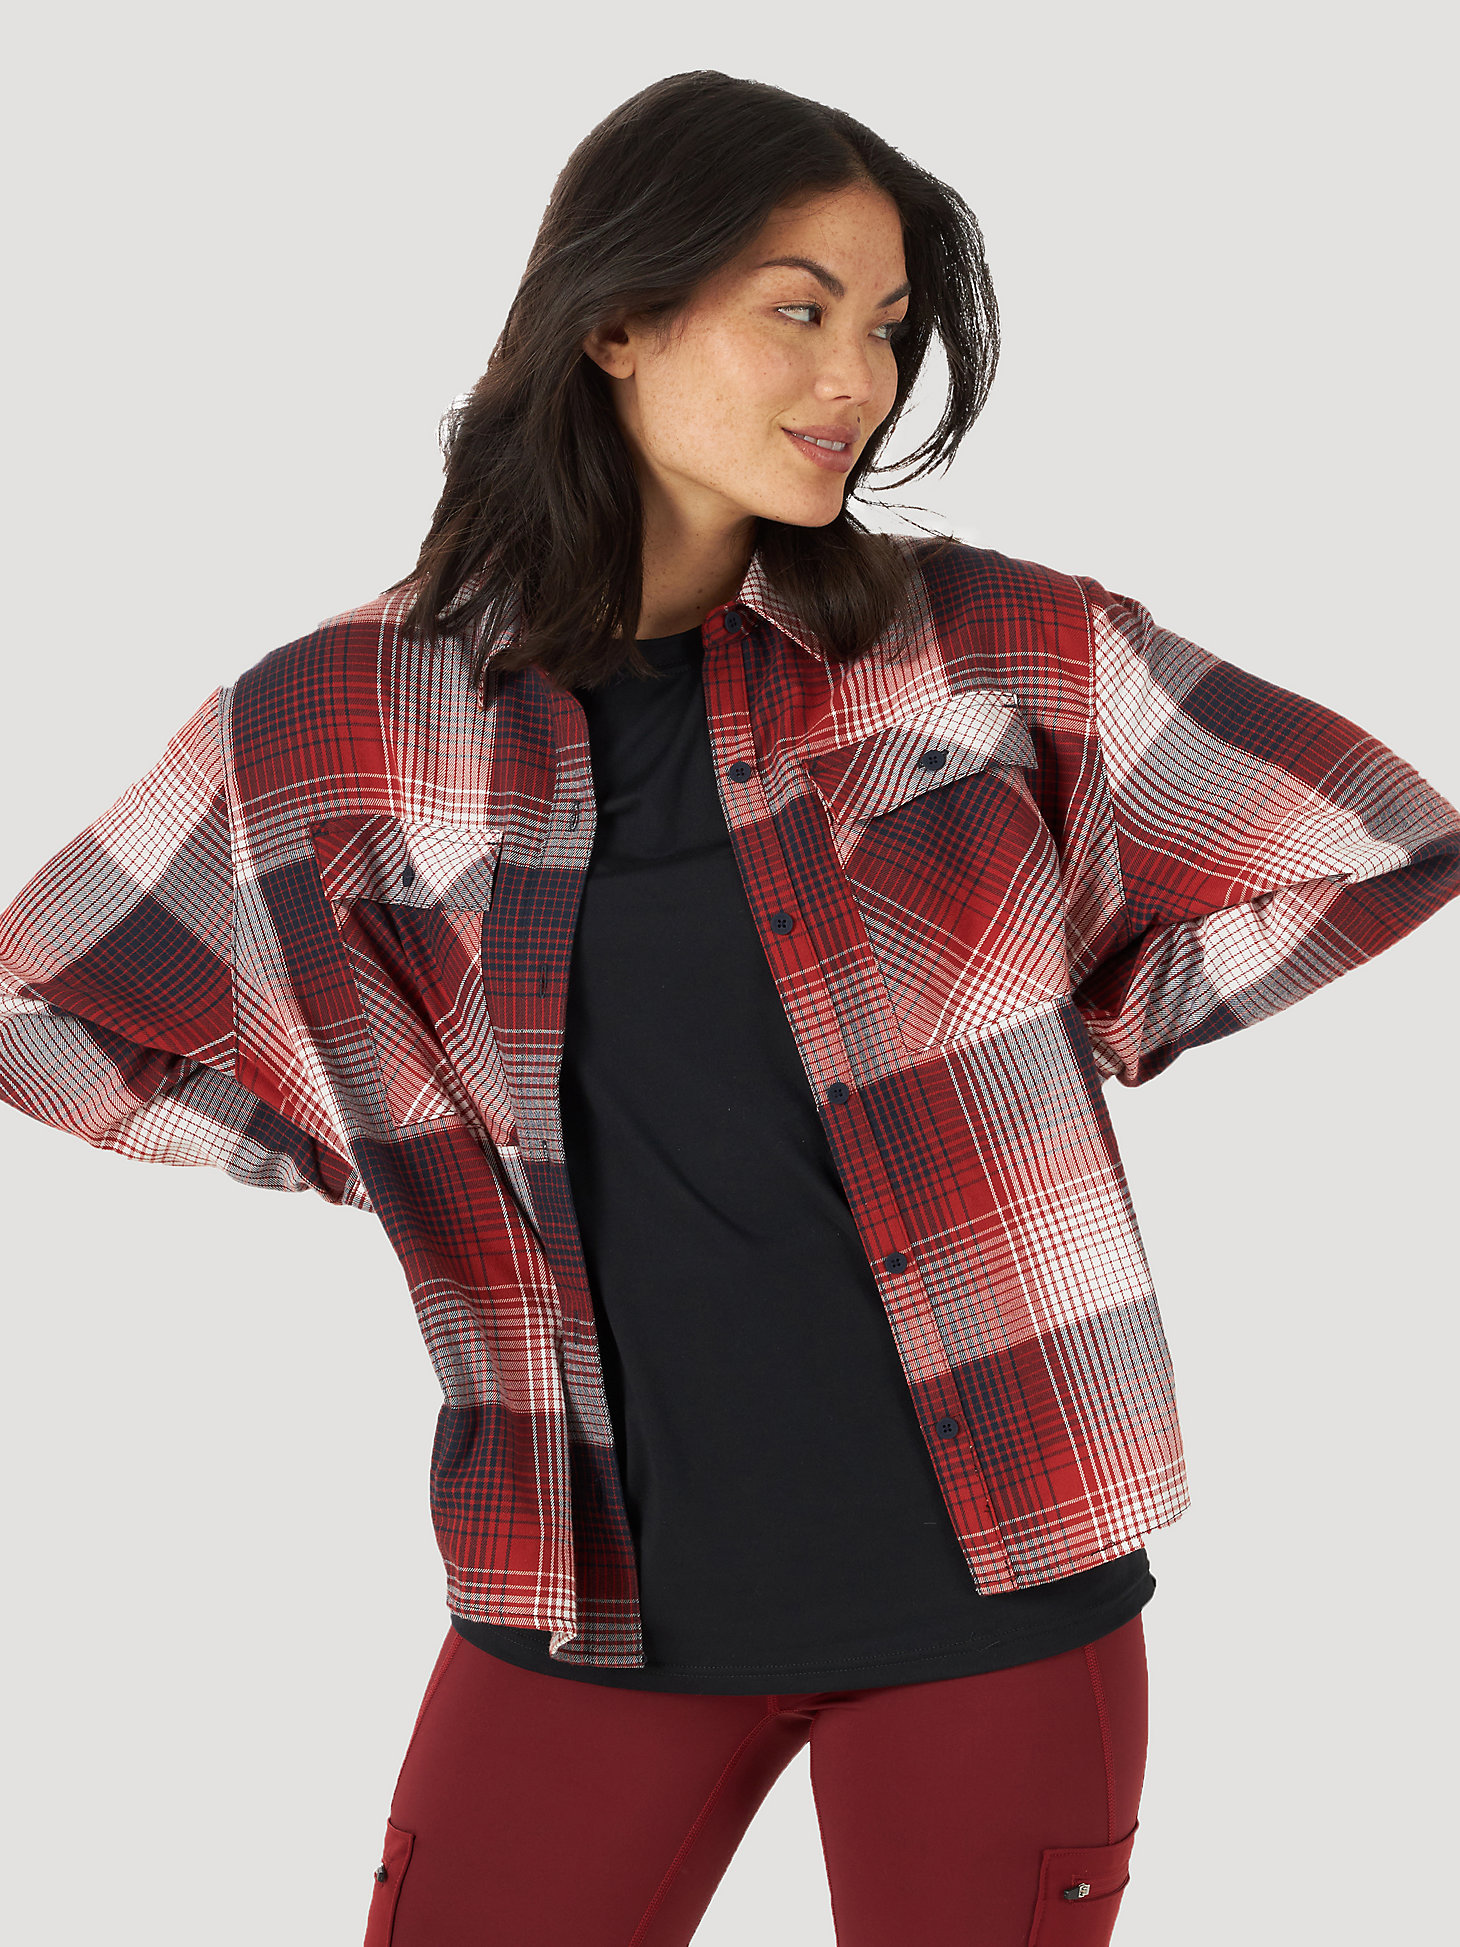 ATG By Wrangler™ Women's Relaxed Flannel Shirt in Dark Red alternative view 2